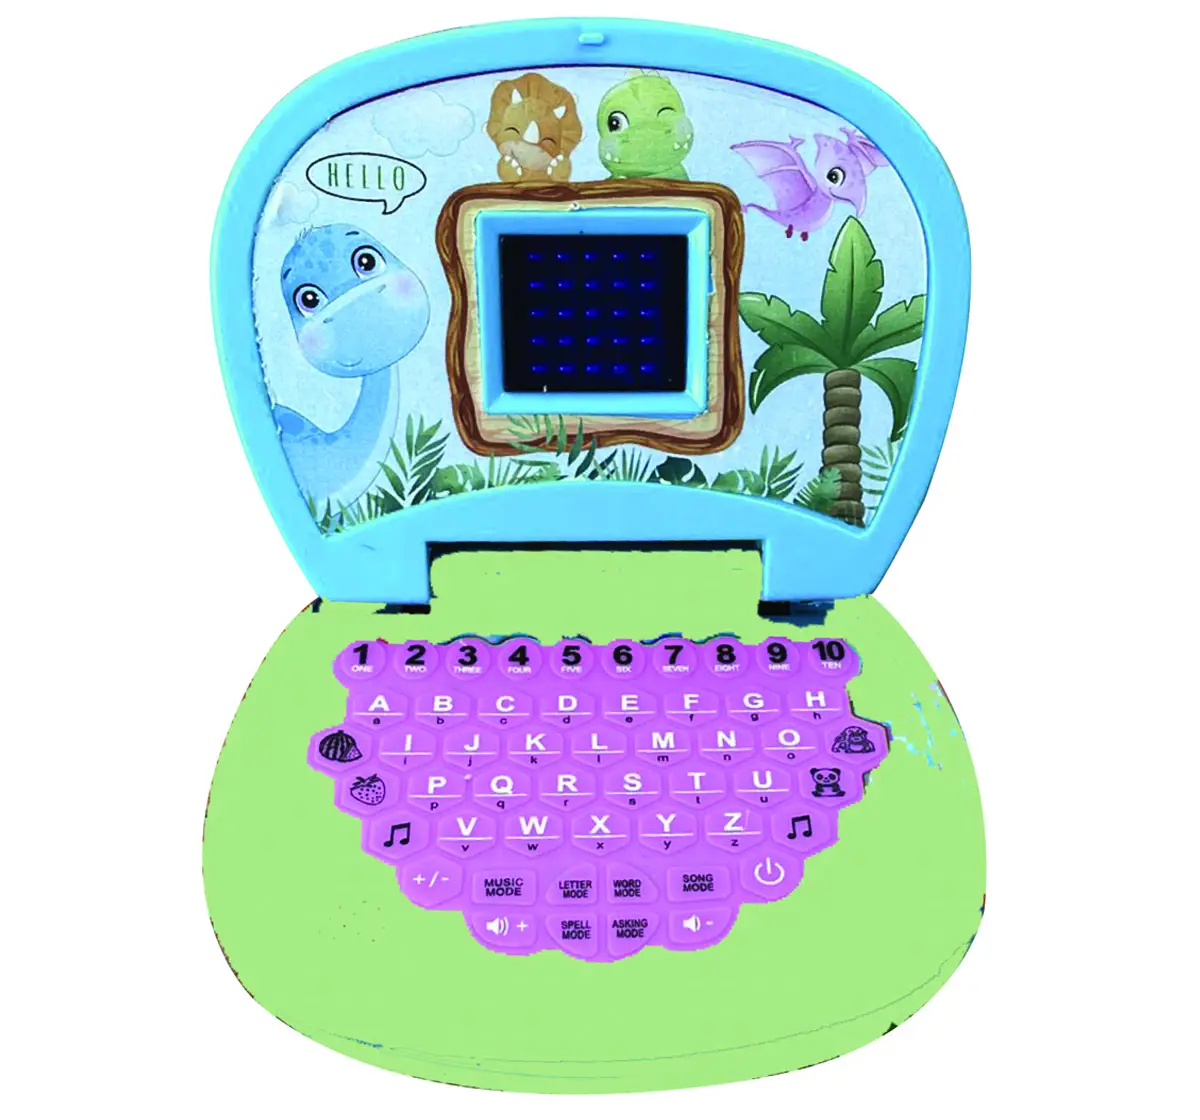 Kids Learning Laptop Dino, 3Y+, Multicolour